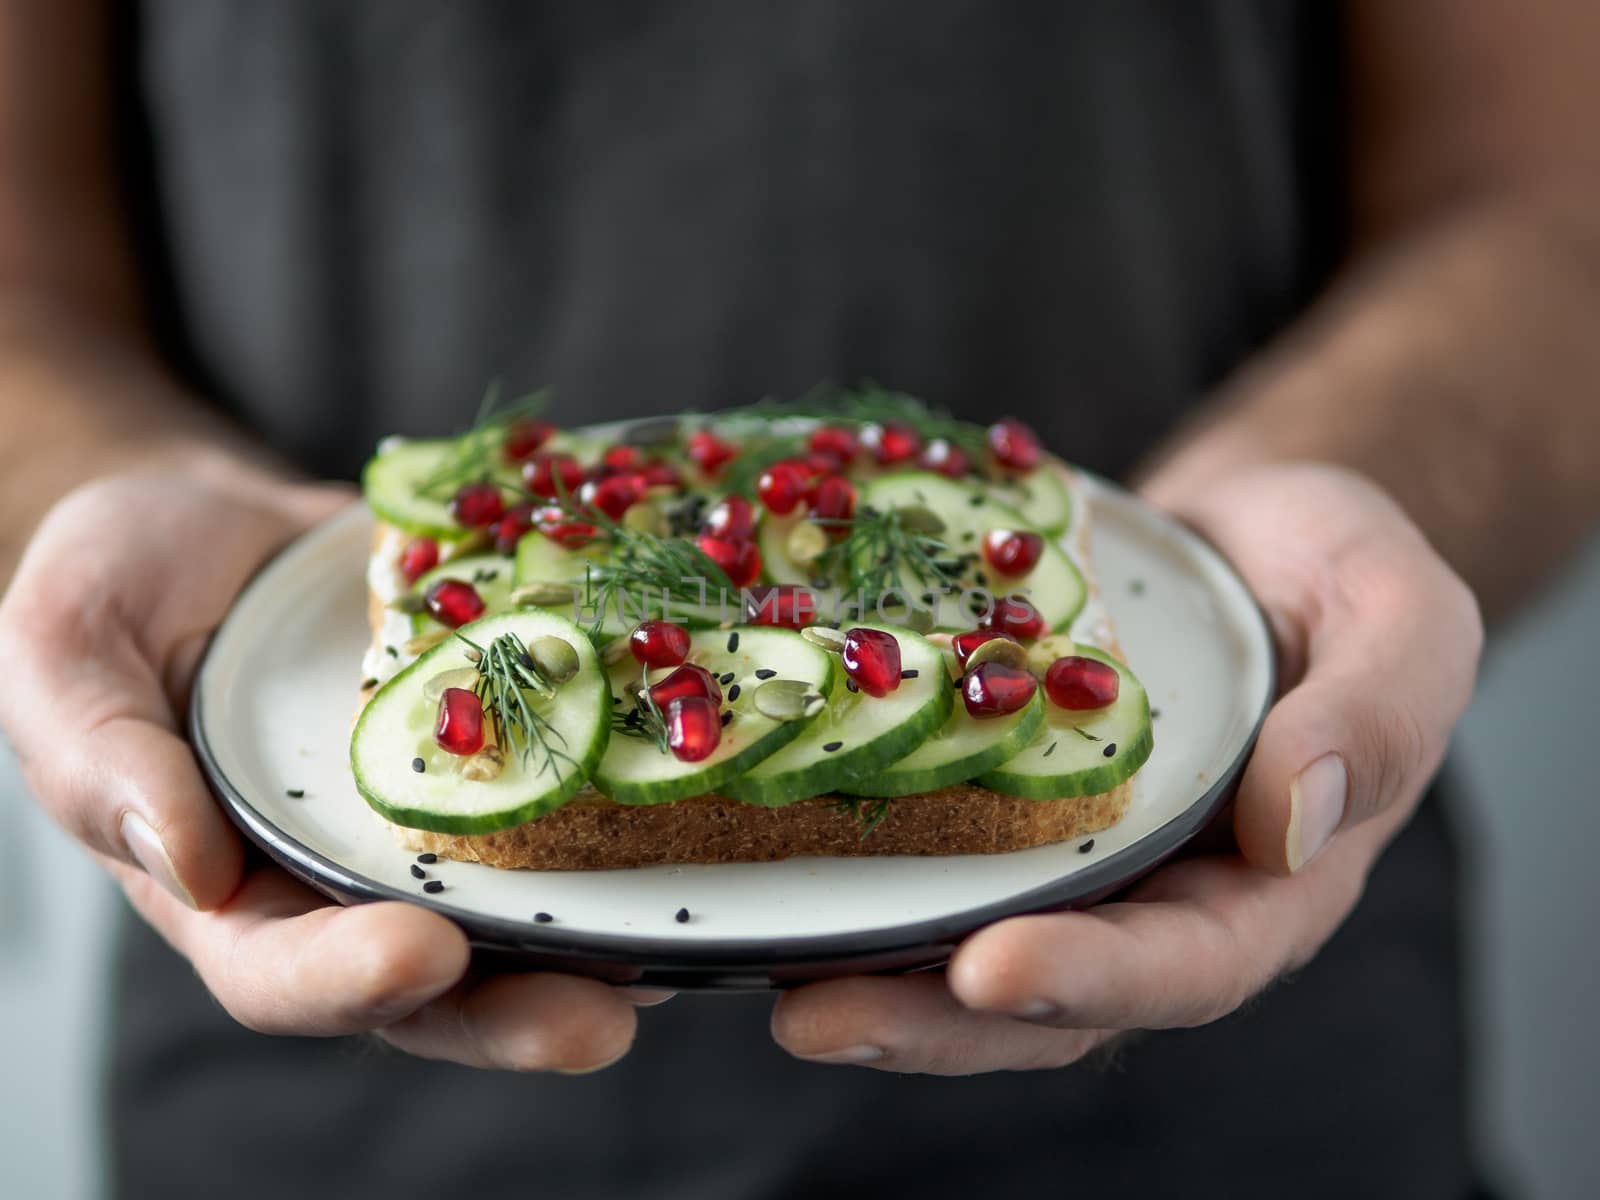 Hands takes plate with vegan sandwich. Healthy appetiezer - whole wheat bread toast with cucumber, pomegranate and black sesame. Vertical